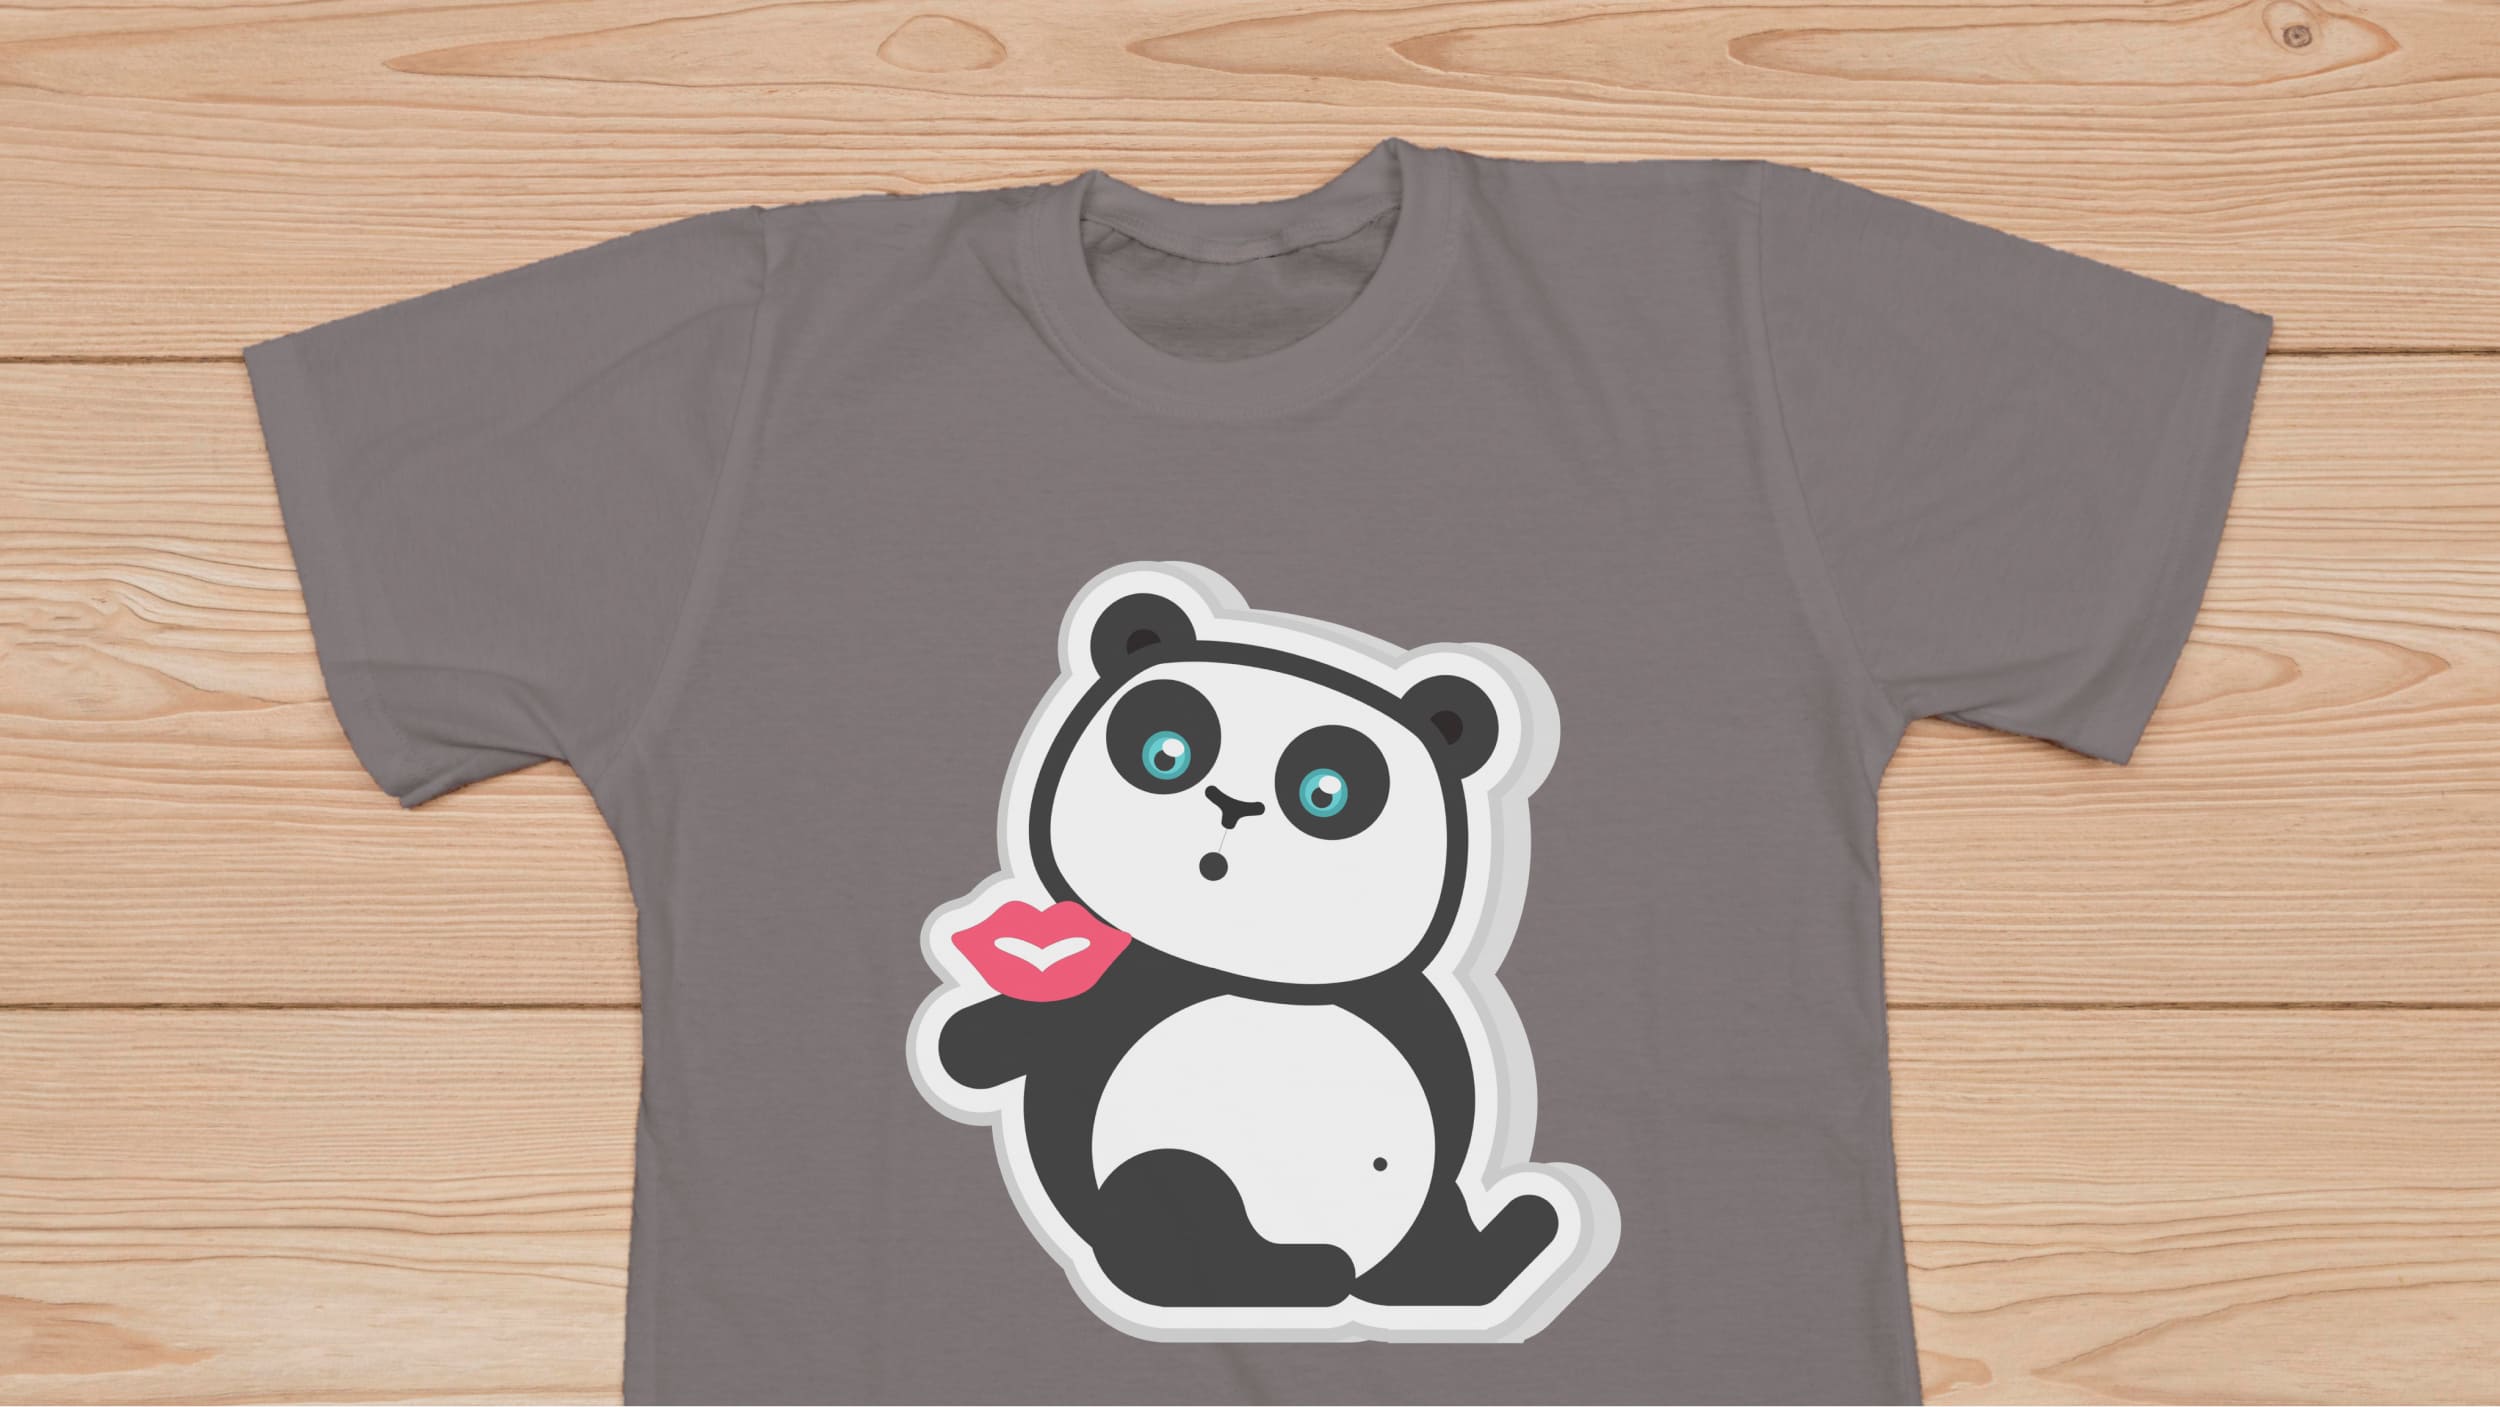 Gray t-shirt with enamored panda bear on a wooden background.